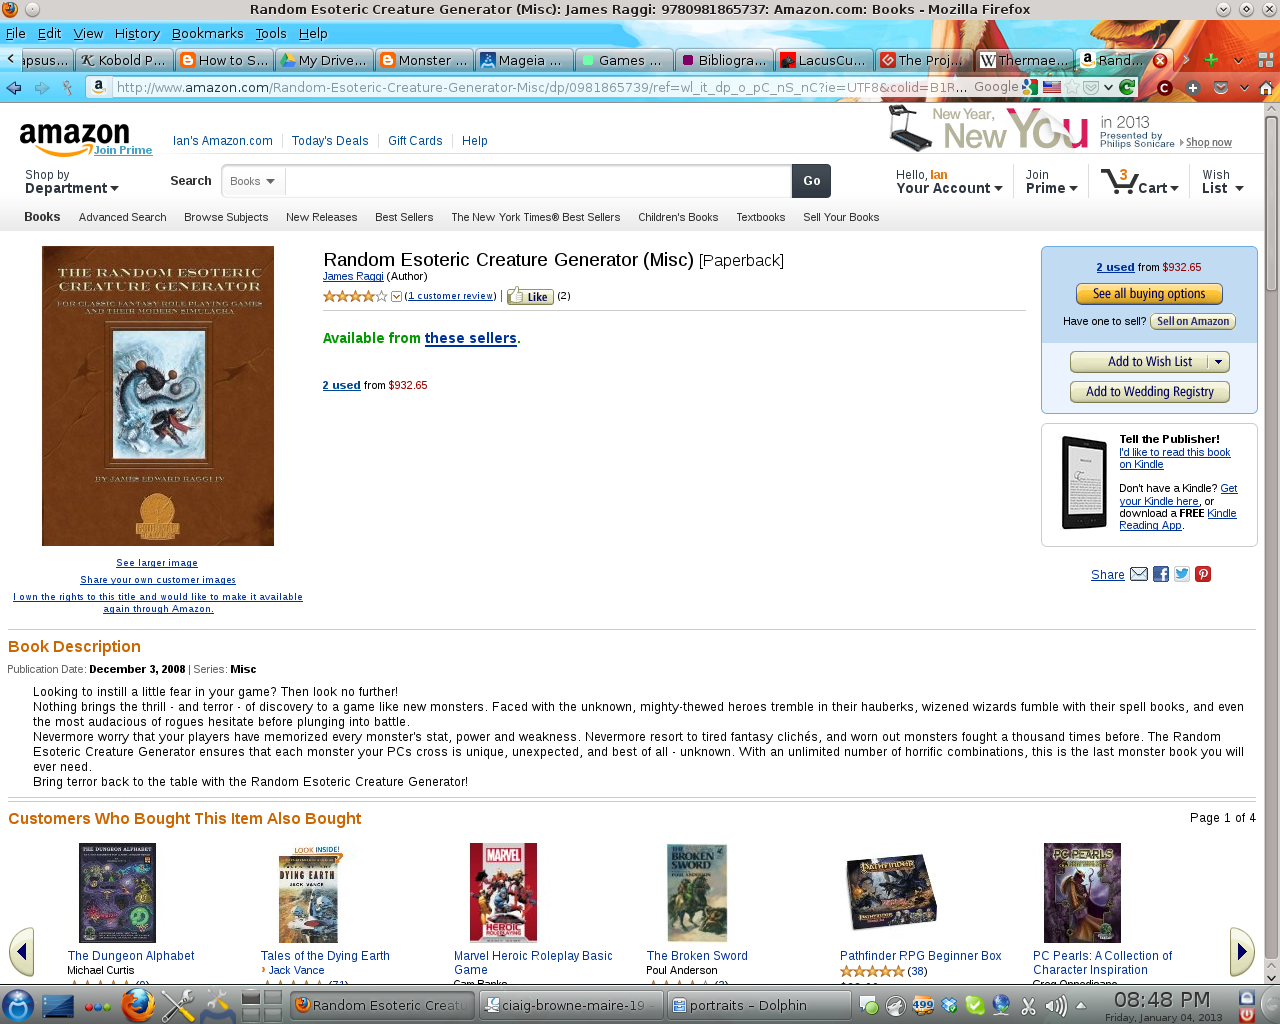 A screenshot from a desktop computer of Amazon open in a browser. The item is The Random Esoteric Creature Generator, available used from $932.65.